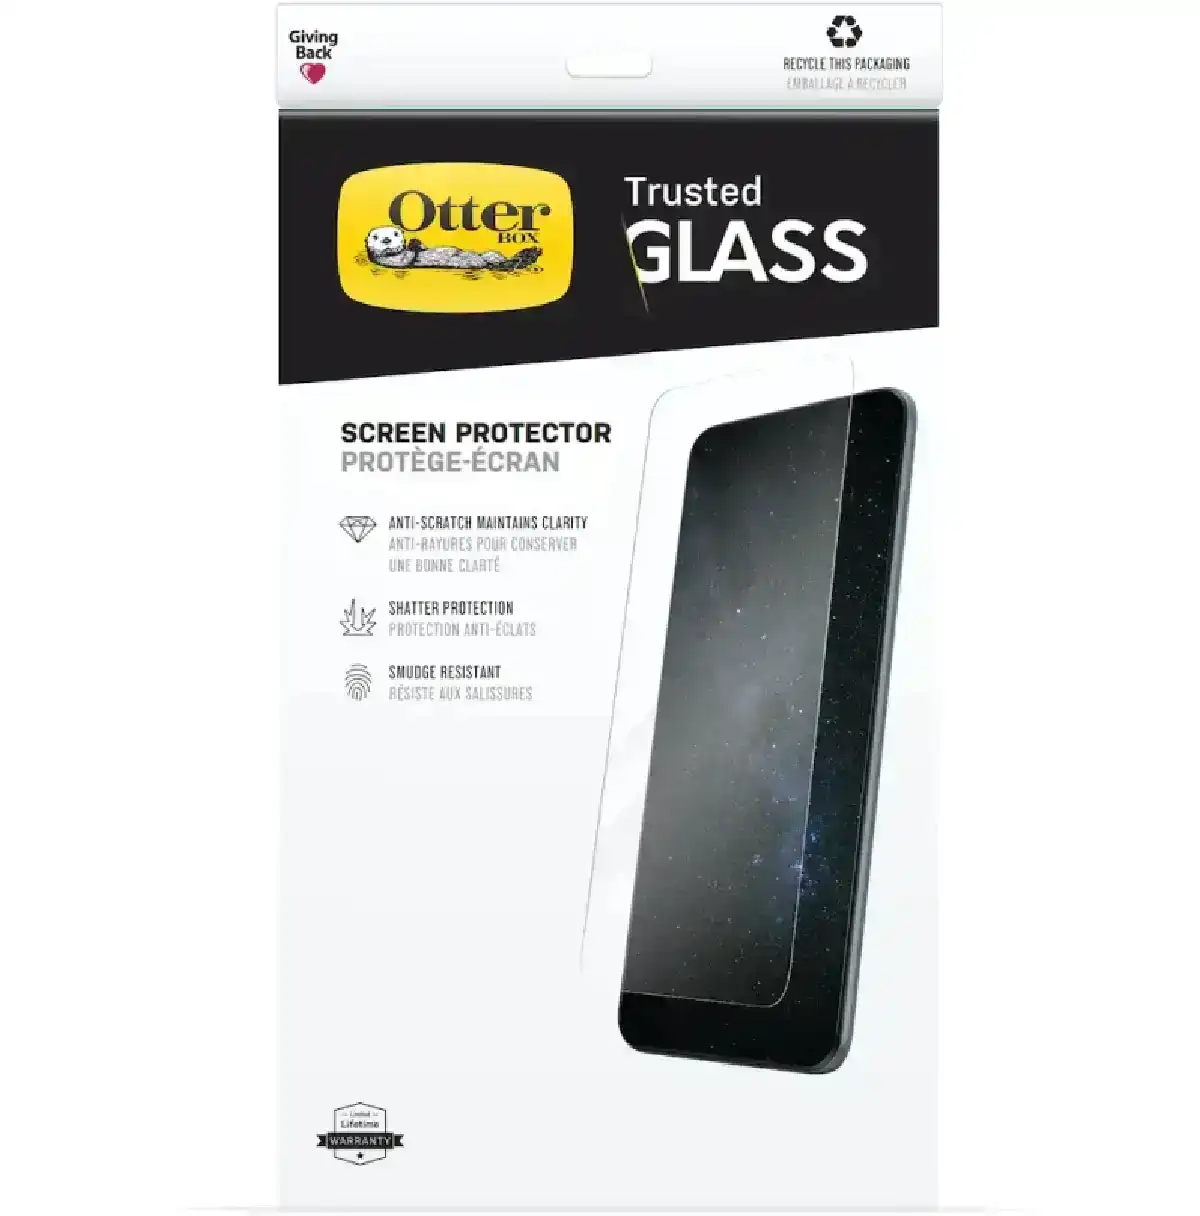 Otterbox Trusted Glass Screen Protector For iPhone 14 Pro Max